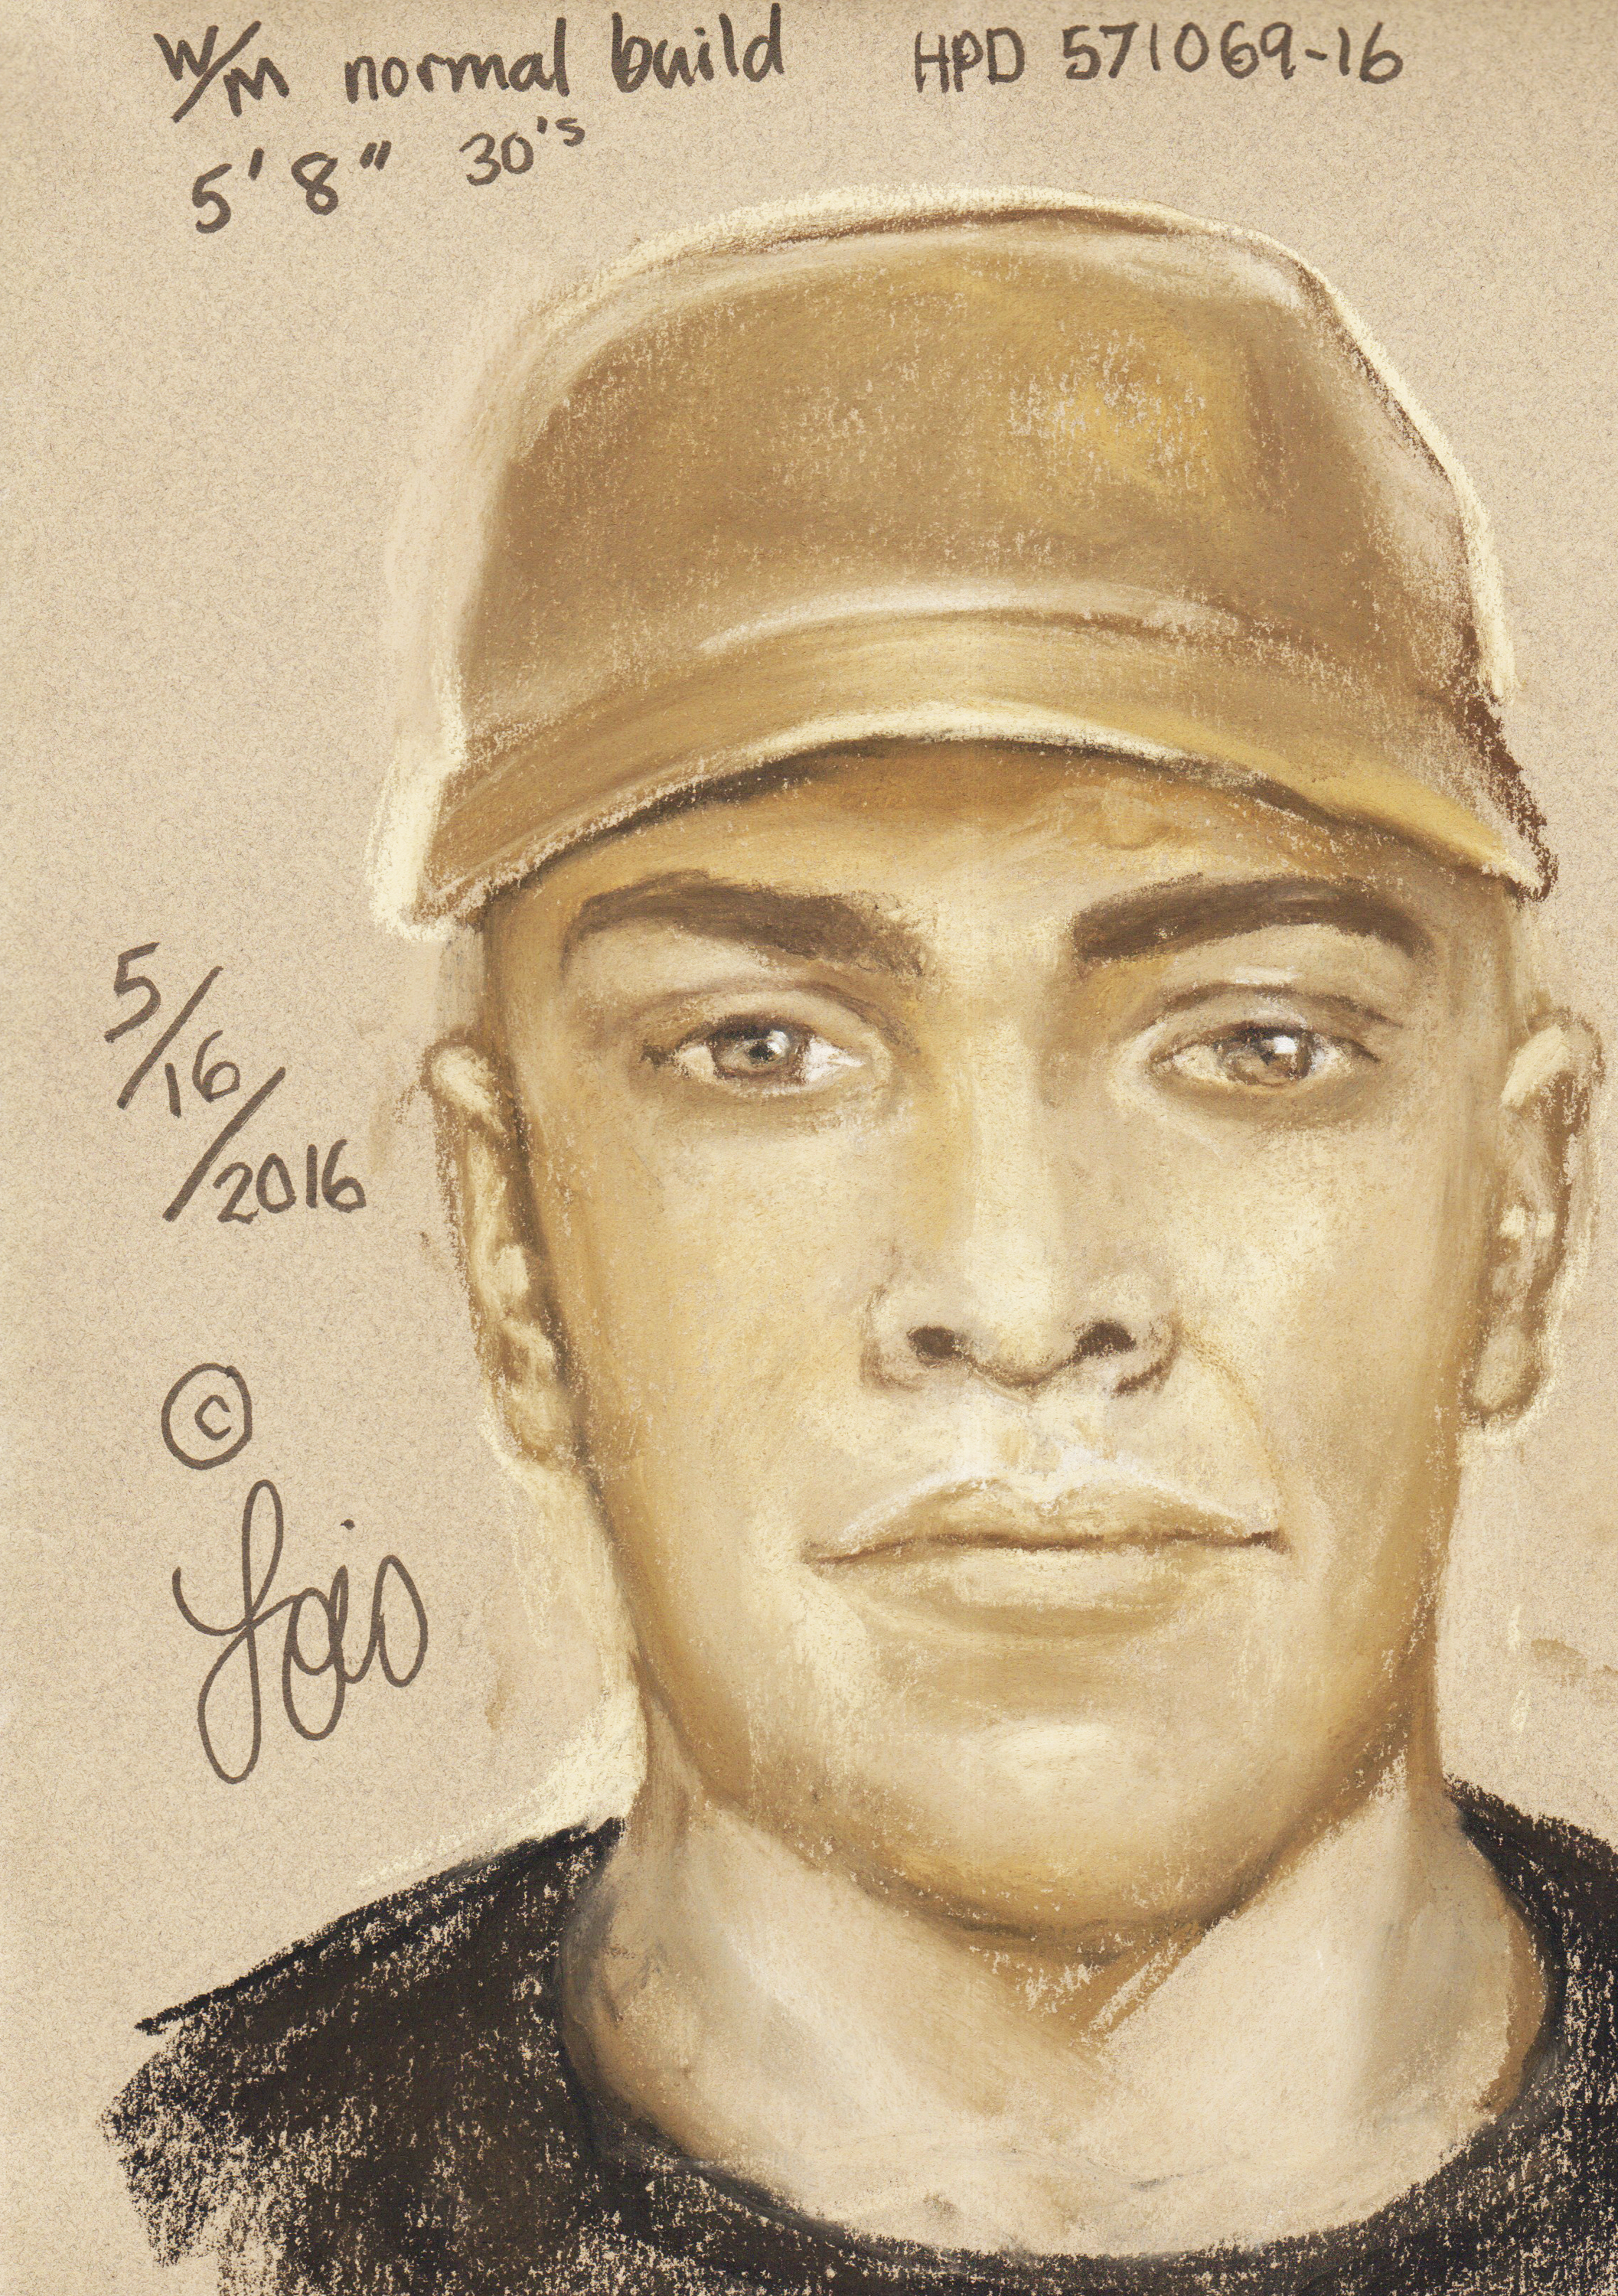 A composite sketch of the suspect